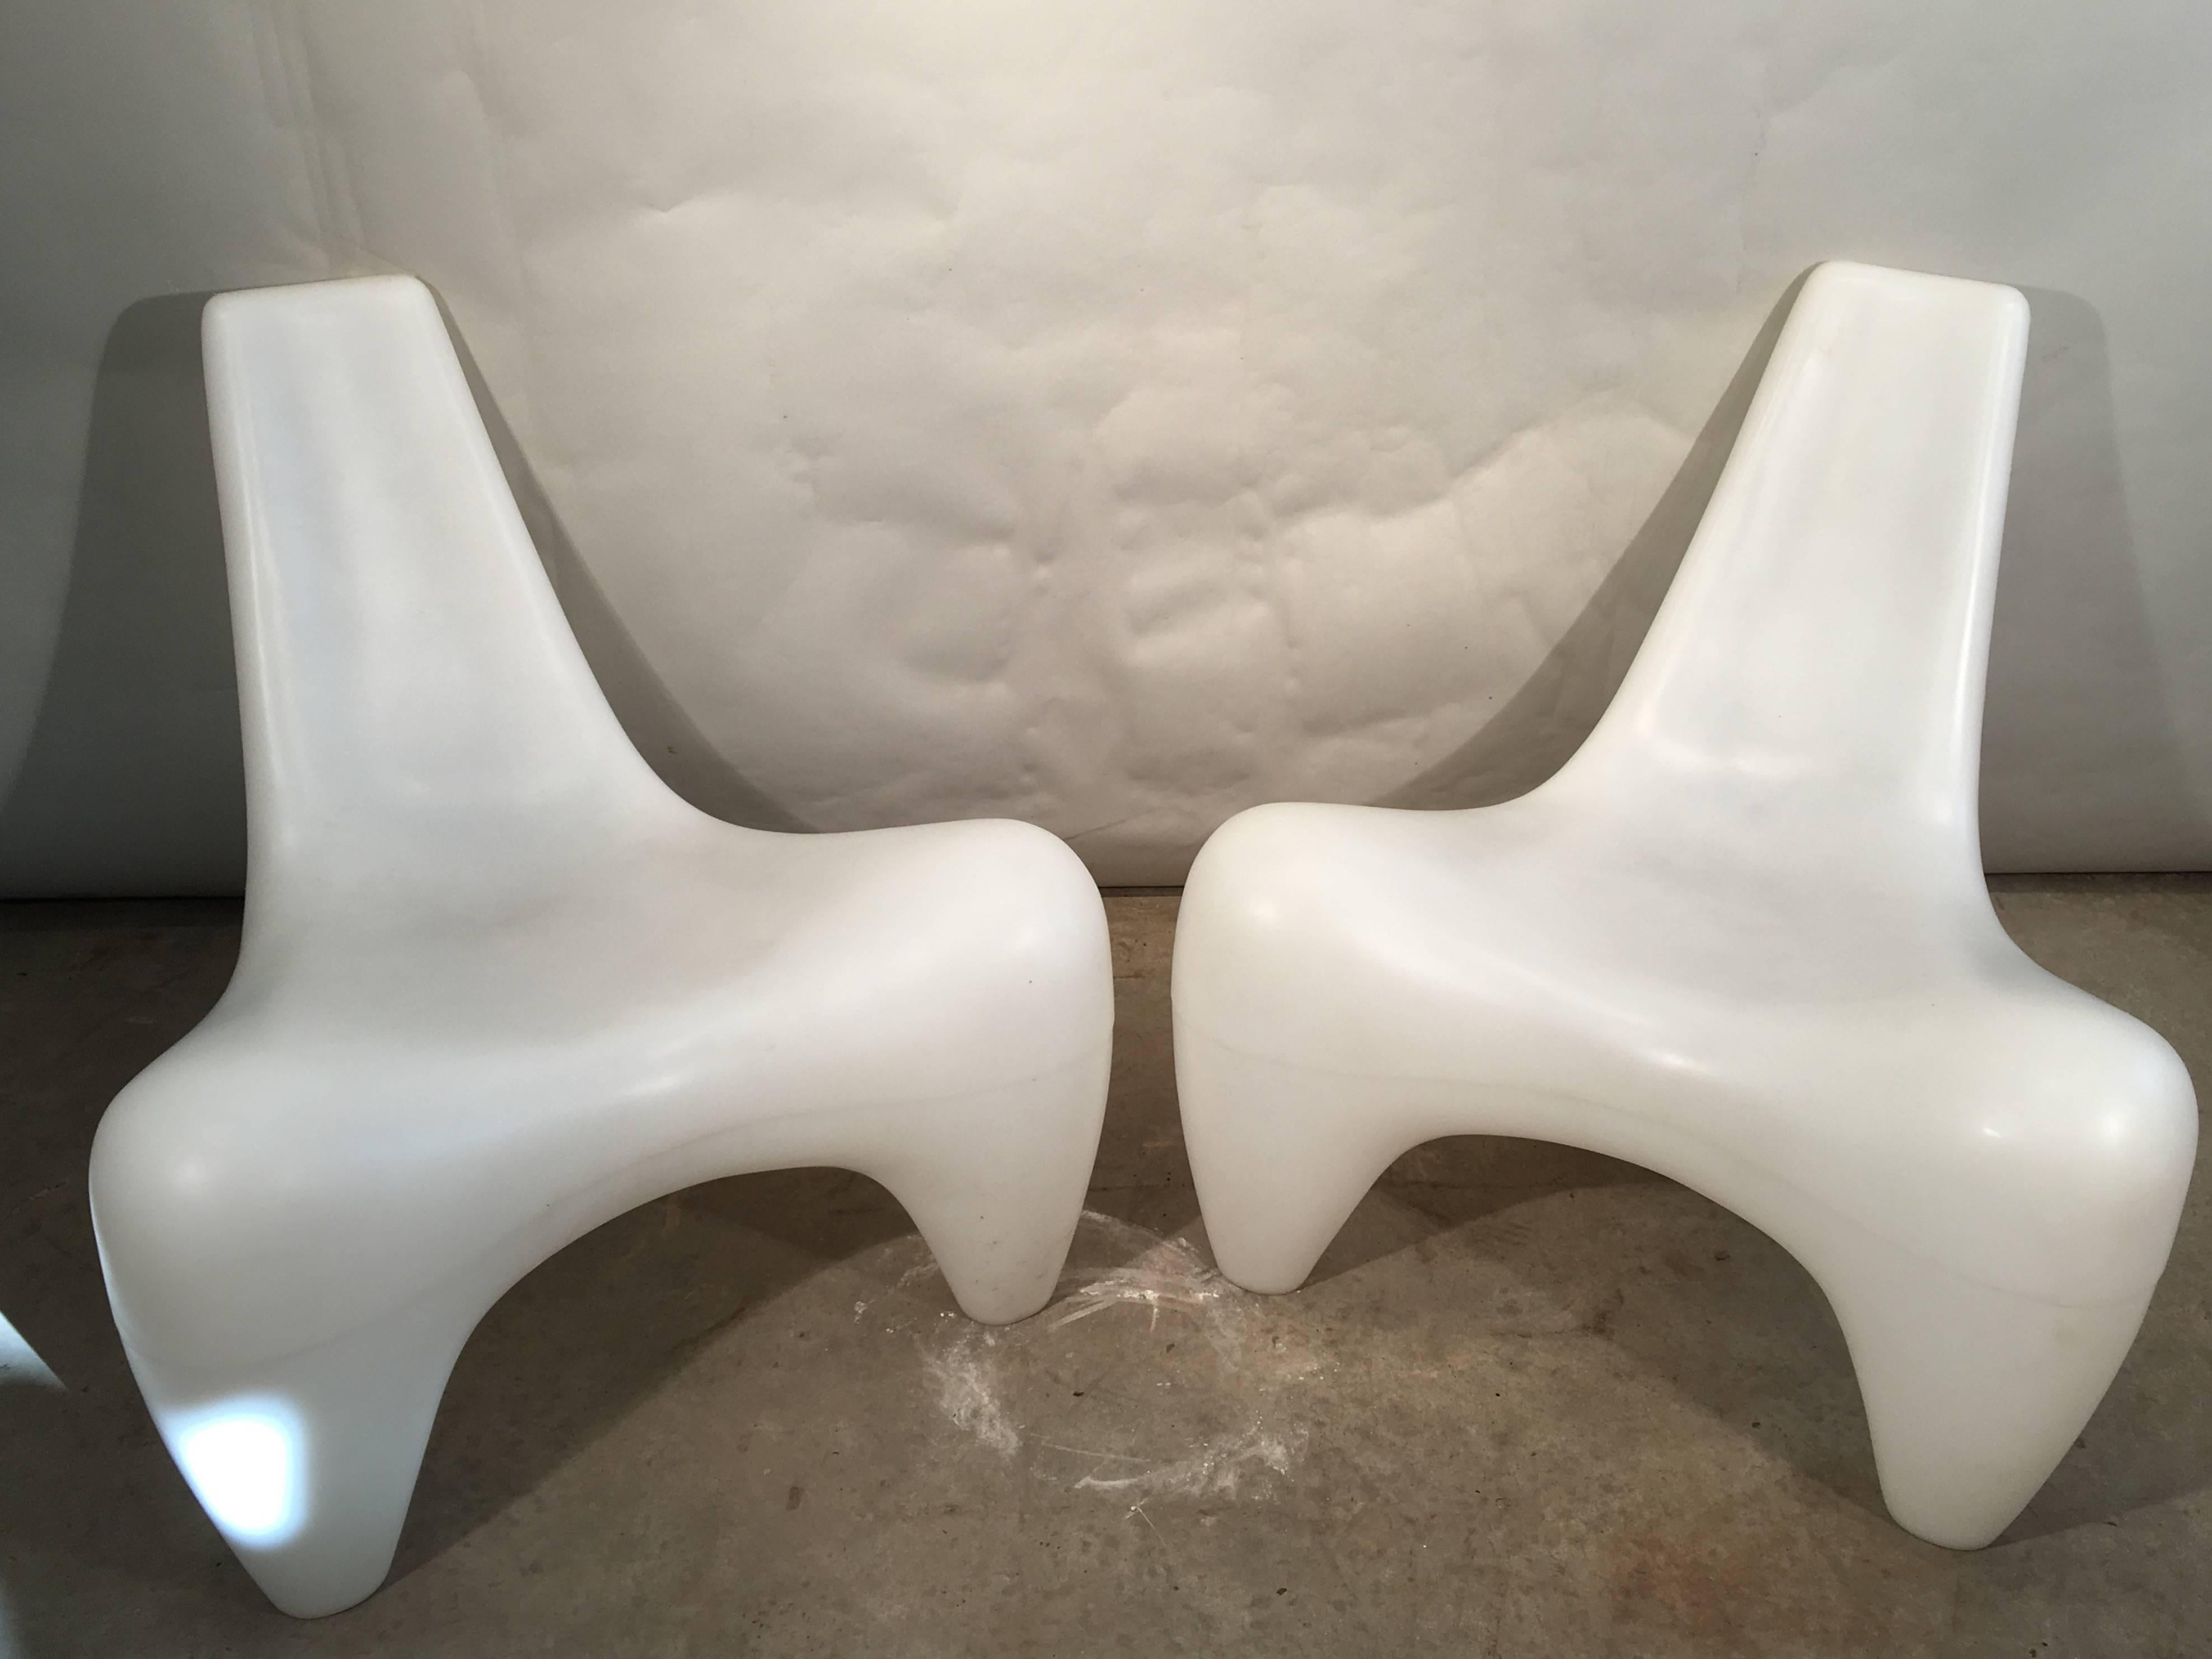 Not our usual fare, but we were completely entranced by the sculptural form, function and interior lighting capability of these chairs. Cast in a single piece from polypropylene, and originally designed by Douglas Mont in 2000 for Jetnet, who has